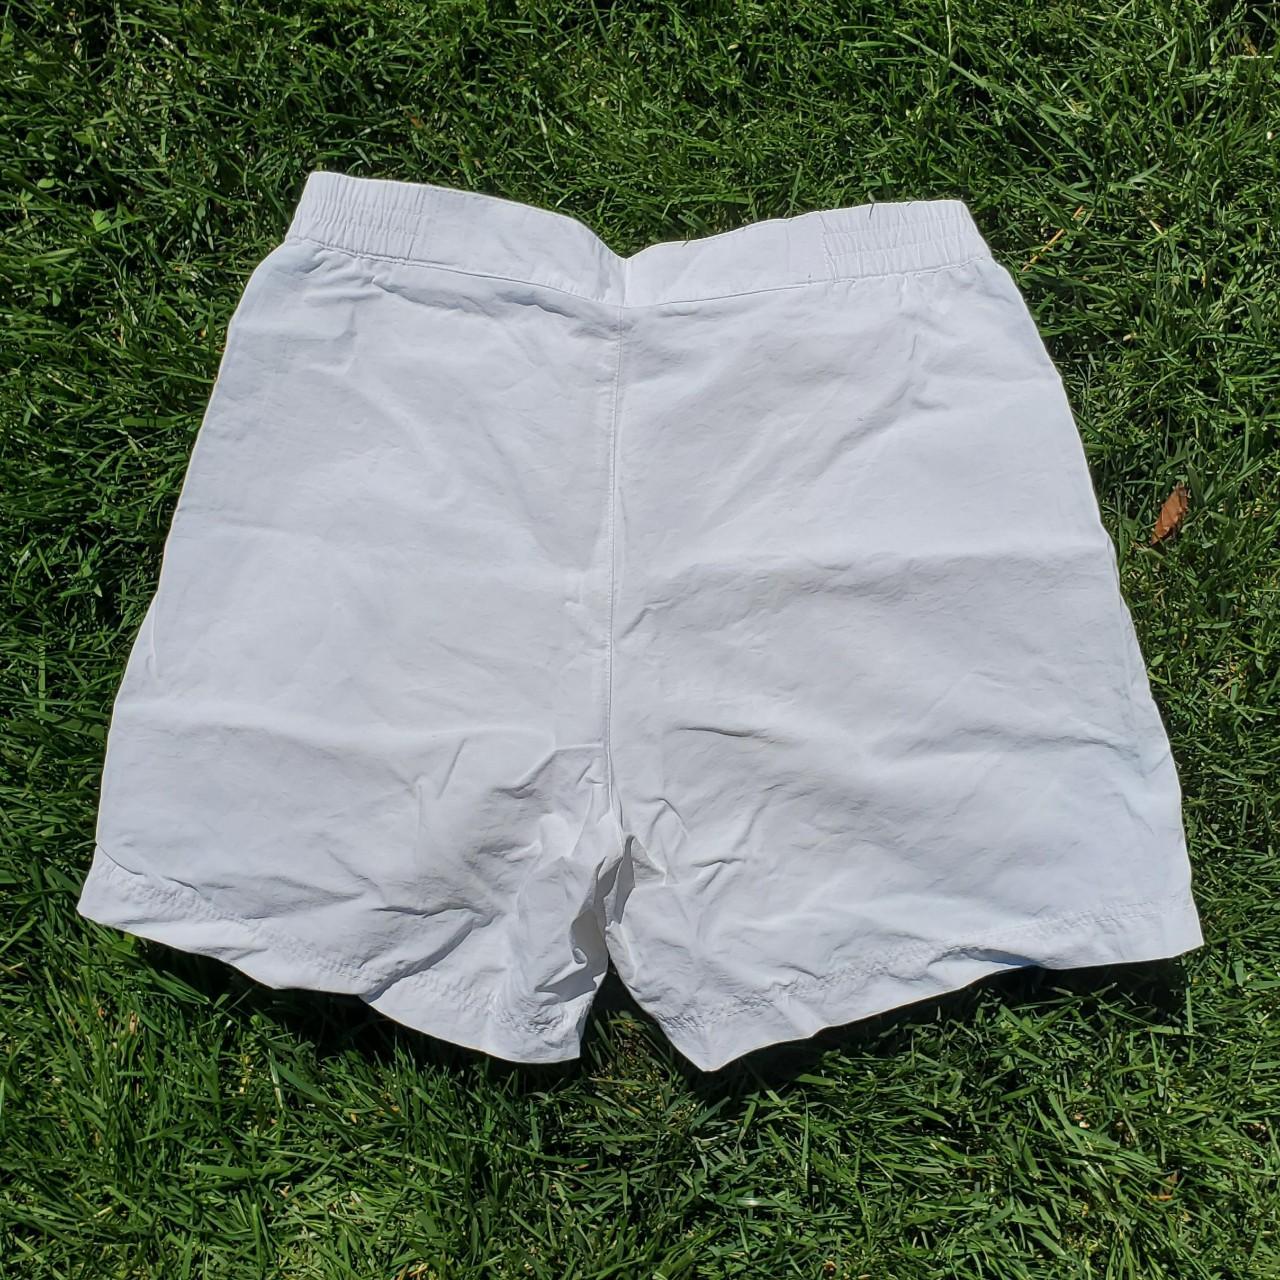 Ellesse Women's White and Blue Shorts (3)